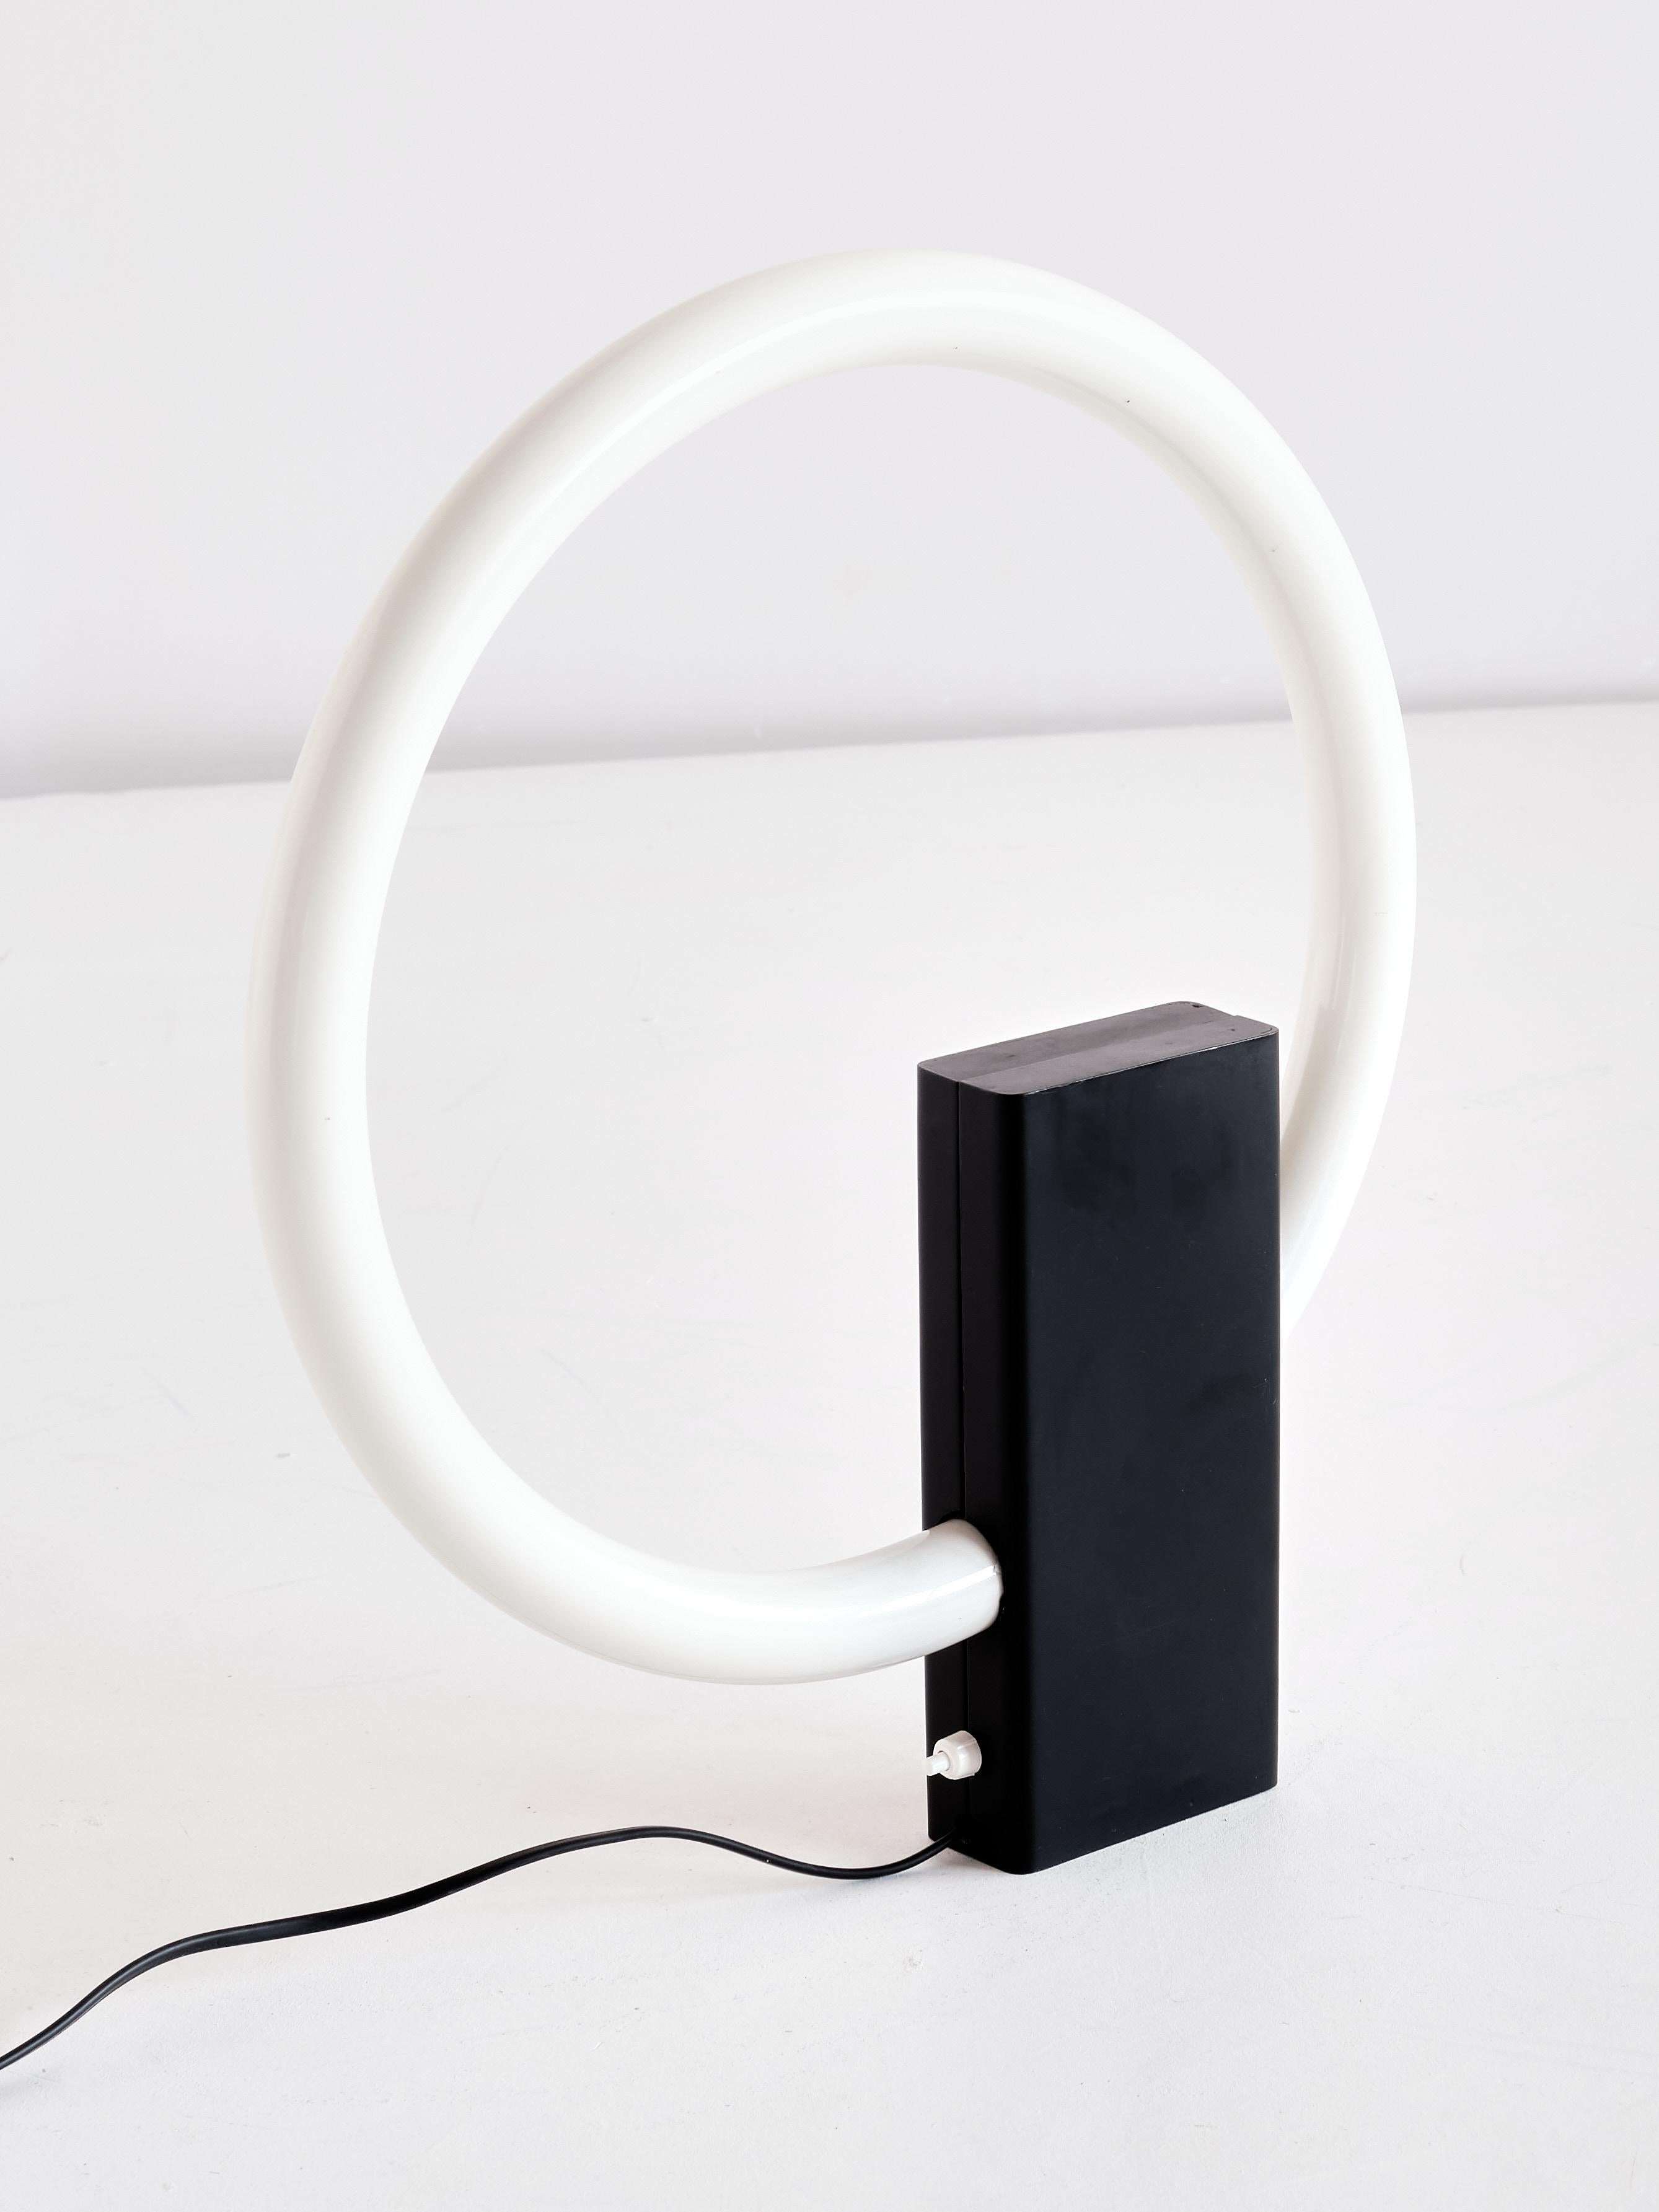 Minimalist Circular Tube Table Lamp with Black Steel Base, Netherlands, 1970s In Good Condition For Sale In The Hague, NL